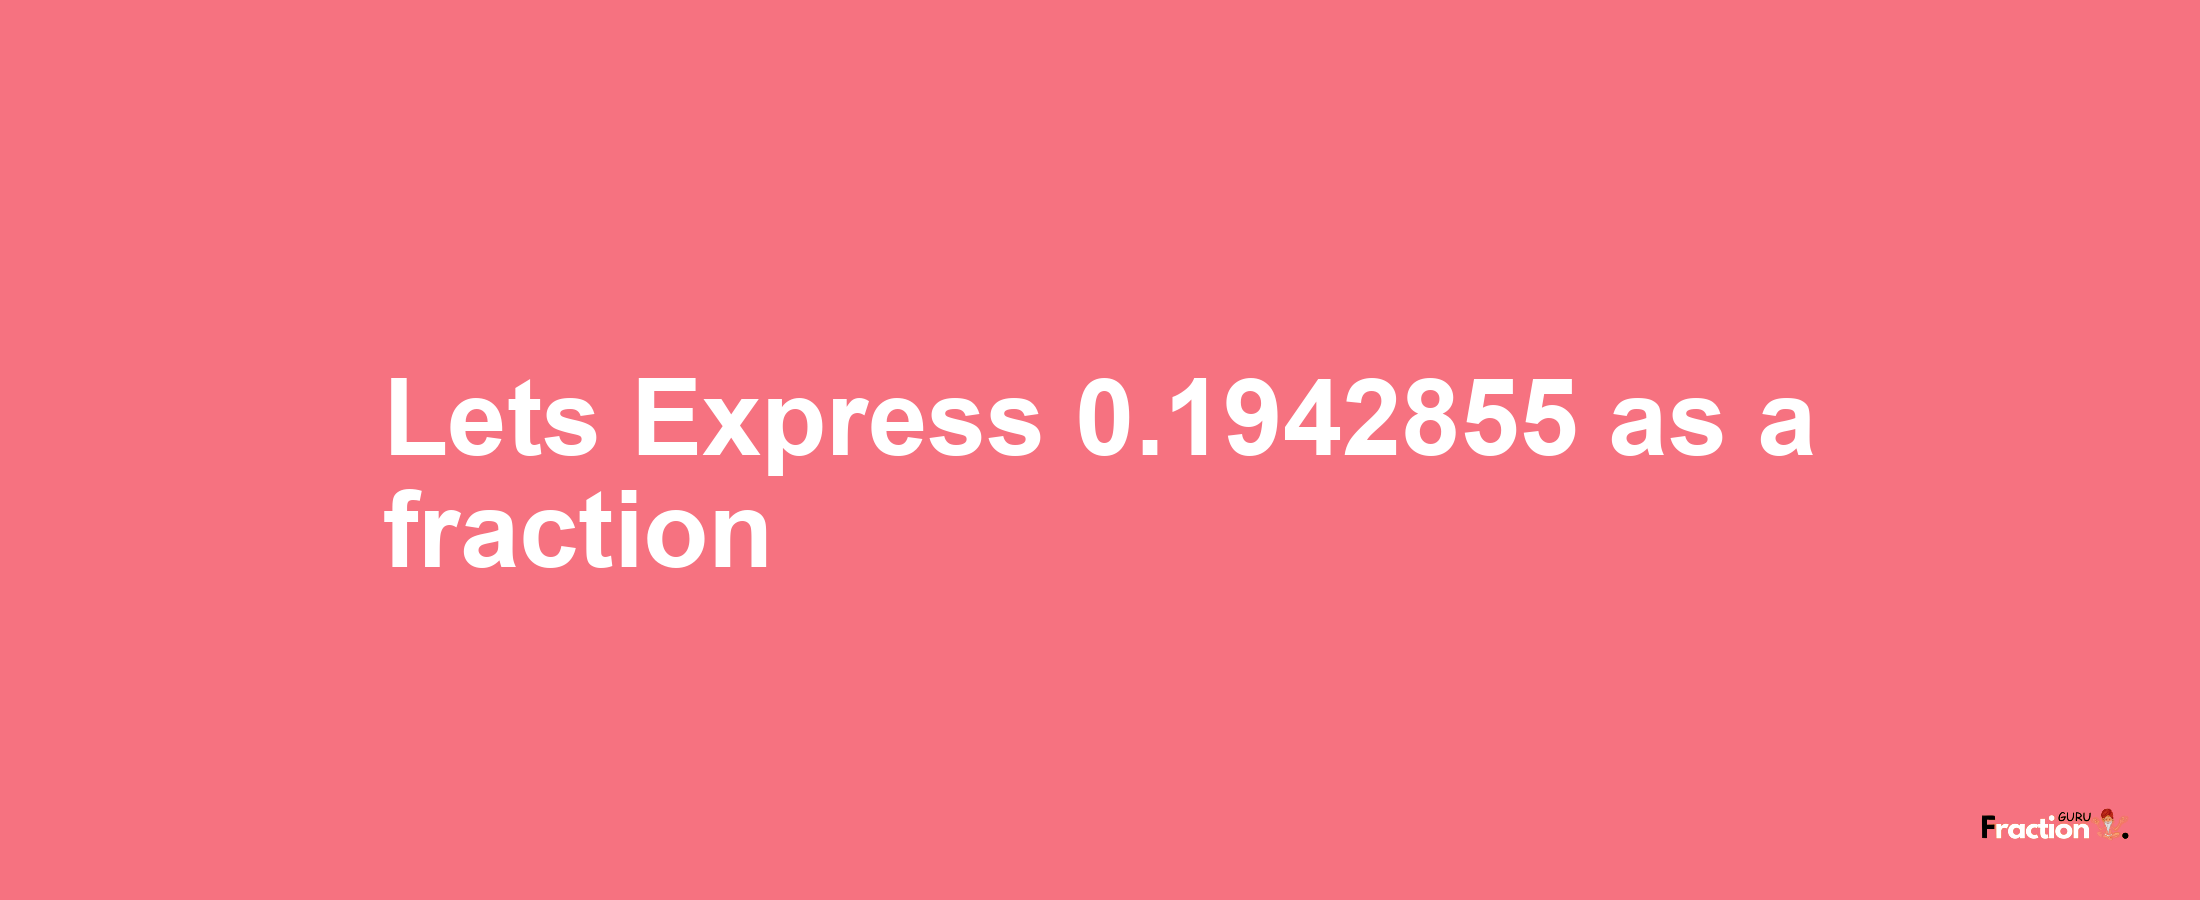 Lets Express 0.1942855 as afraction